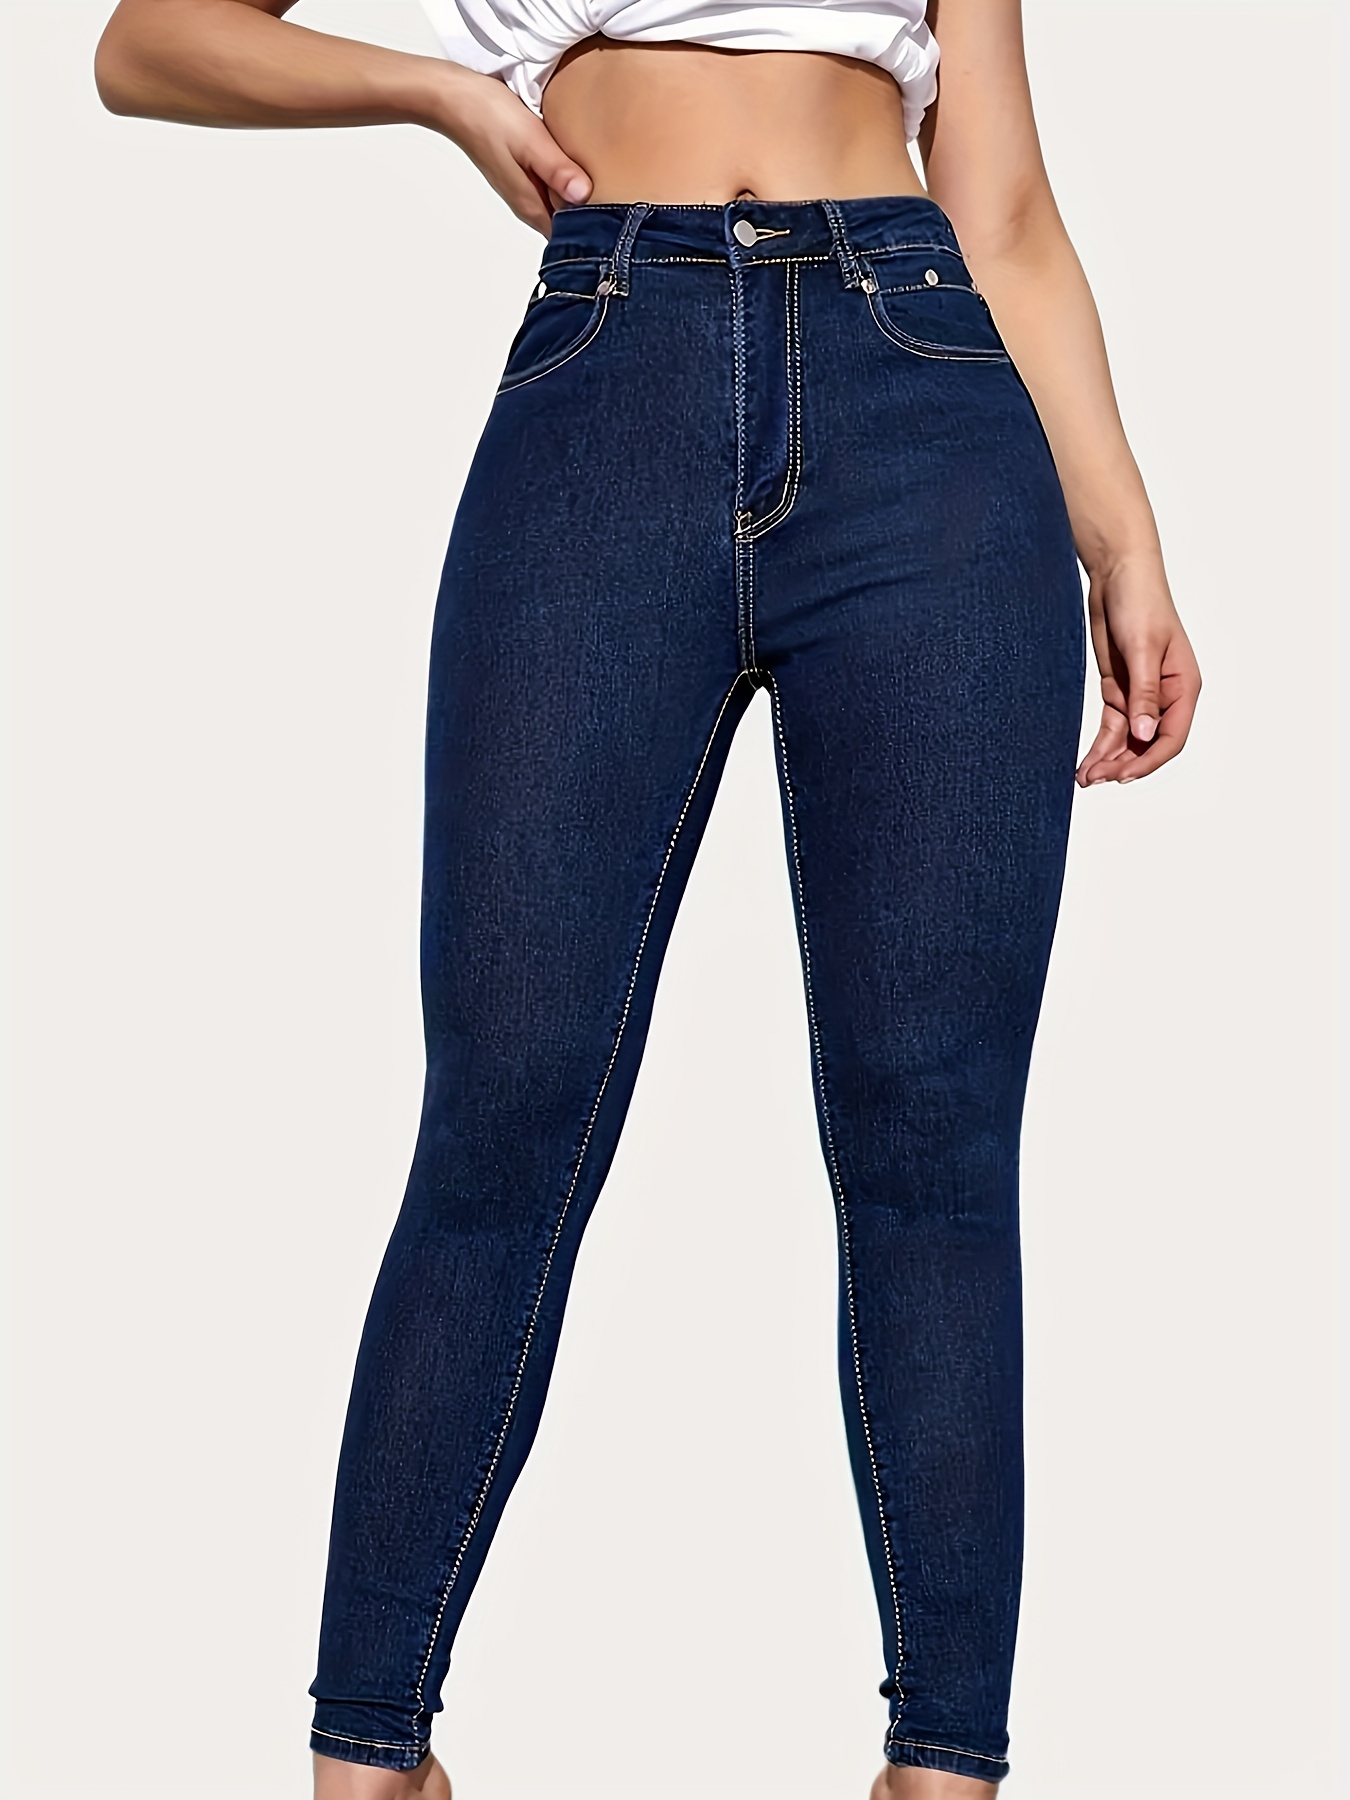 Deep Blue Fleece Lined Skinny Jeans, High Waist Sexy Stretchy Tight Jeans,  Women's Denim Jeans & Clothing